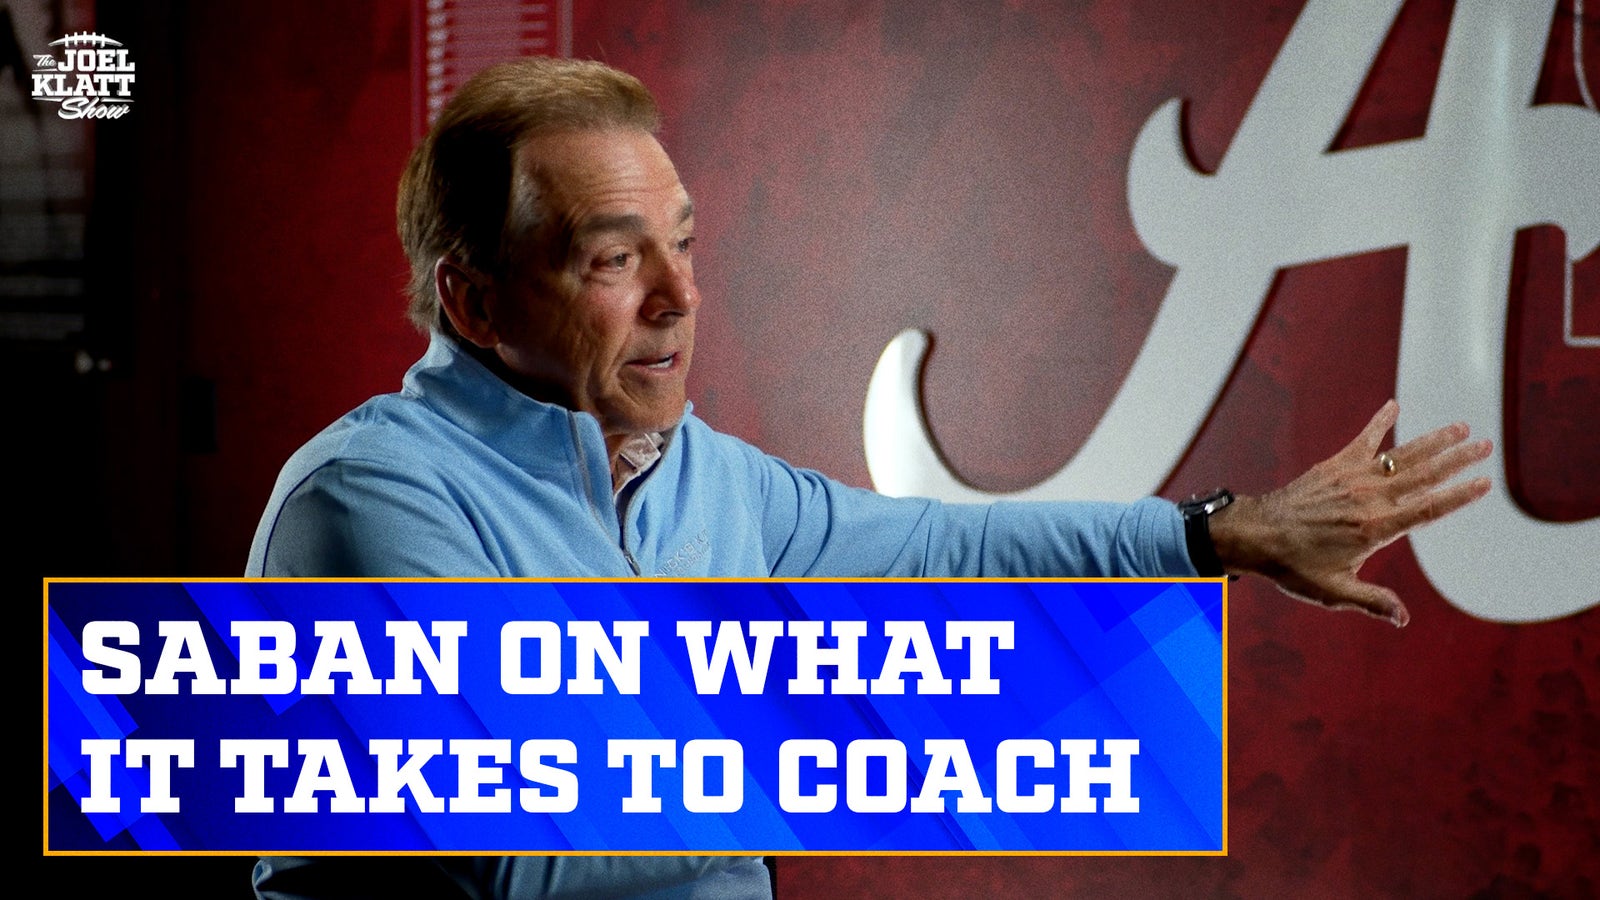 Nick Saban on what it takes to coach and thoughts on the recruiting process